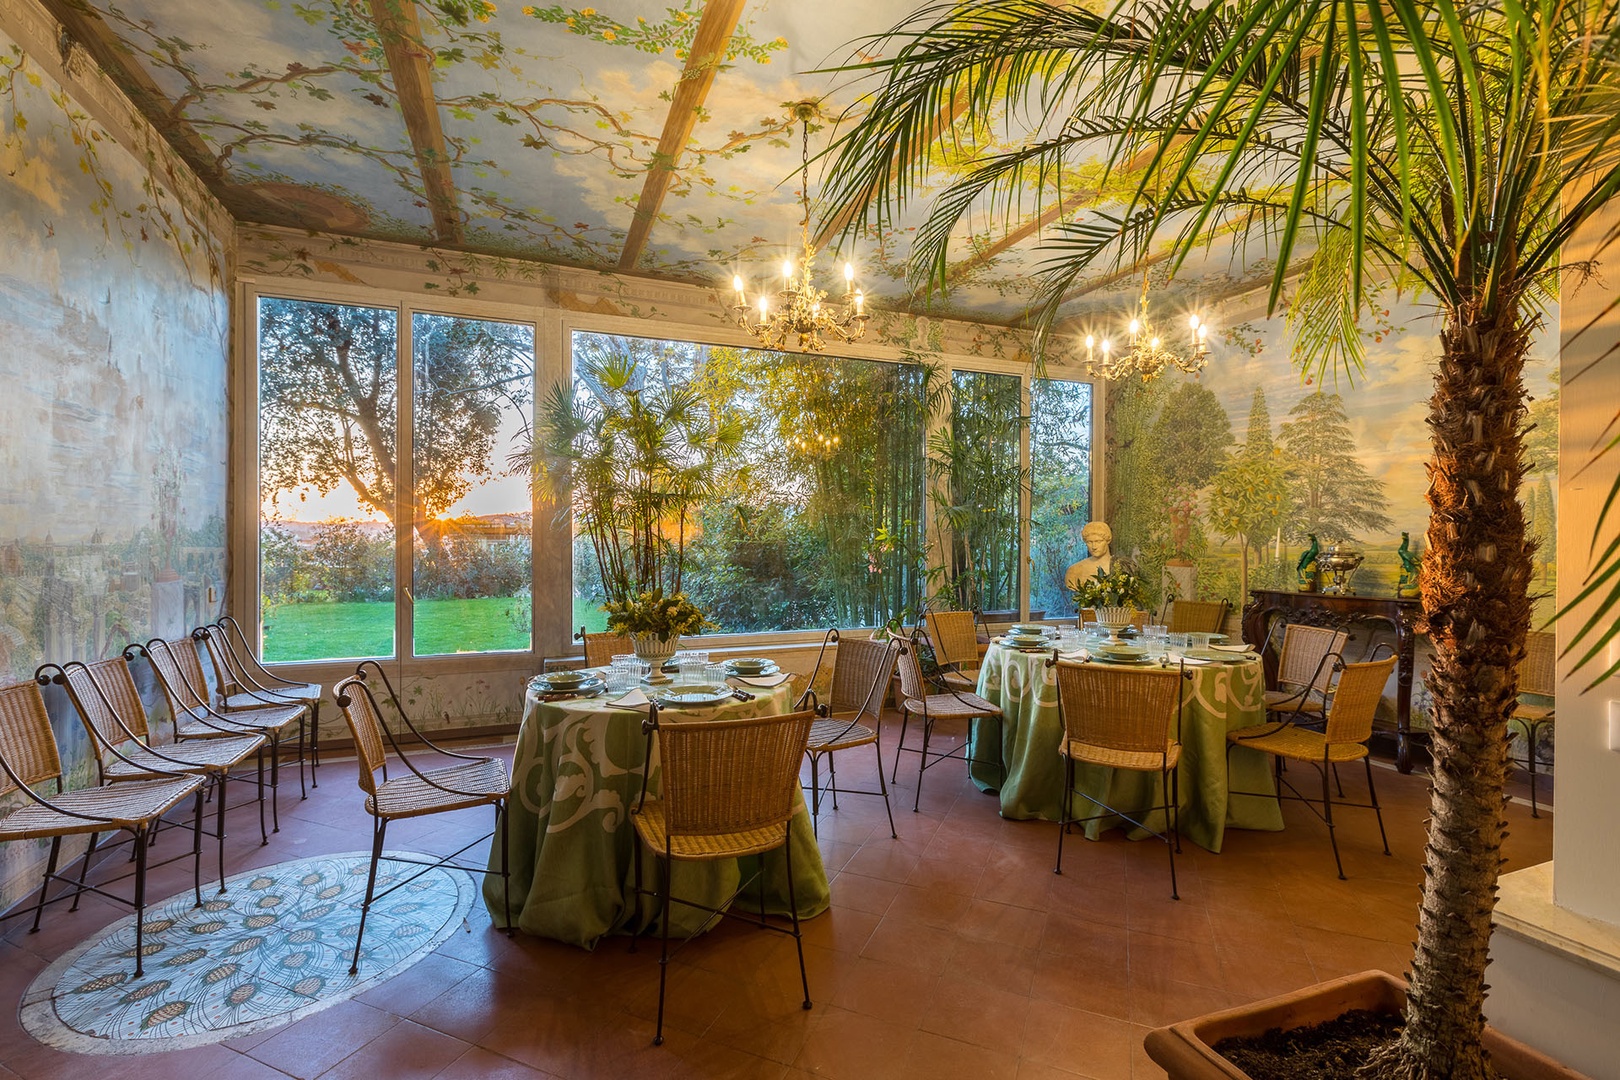 Toast your stay in Rome as you dine in splendor at Villa Aurora.